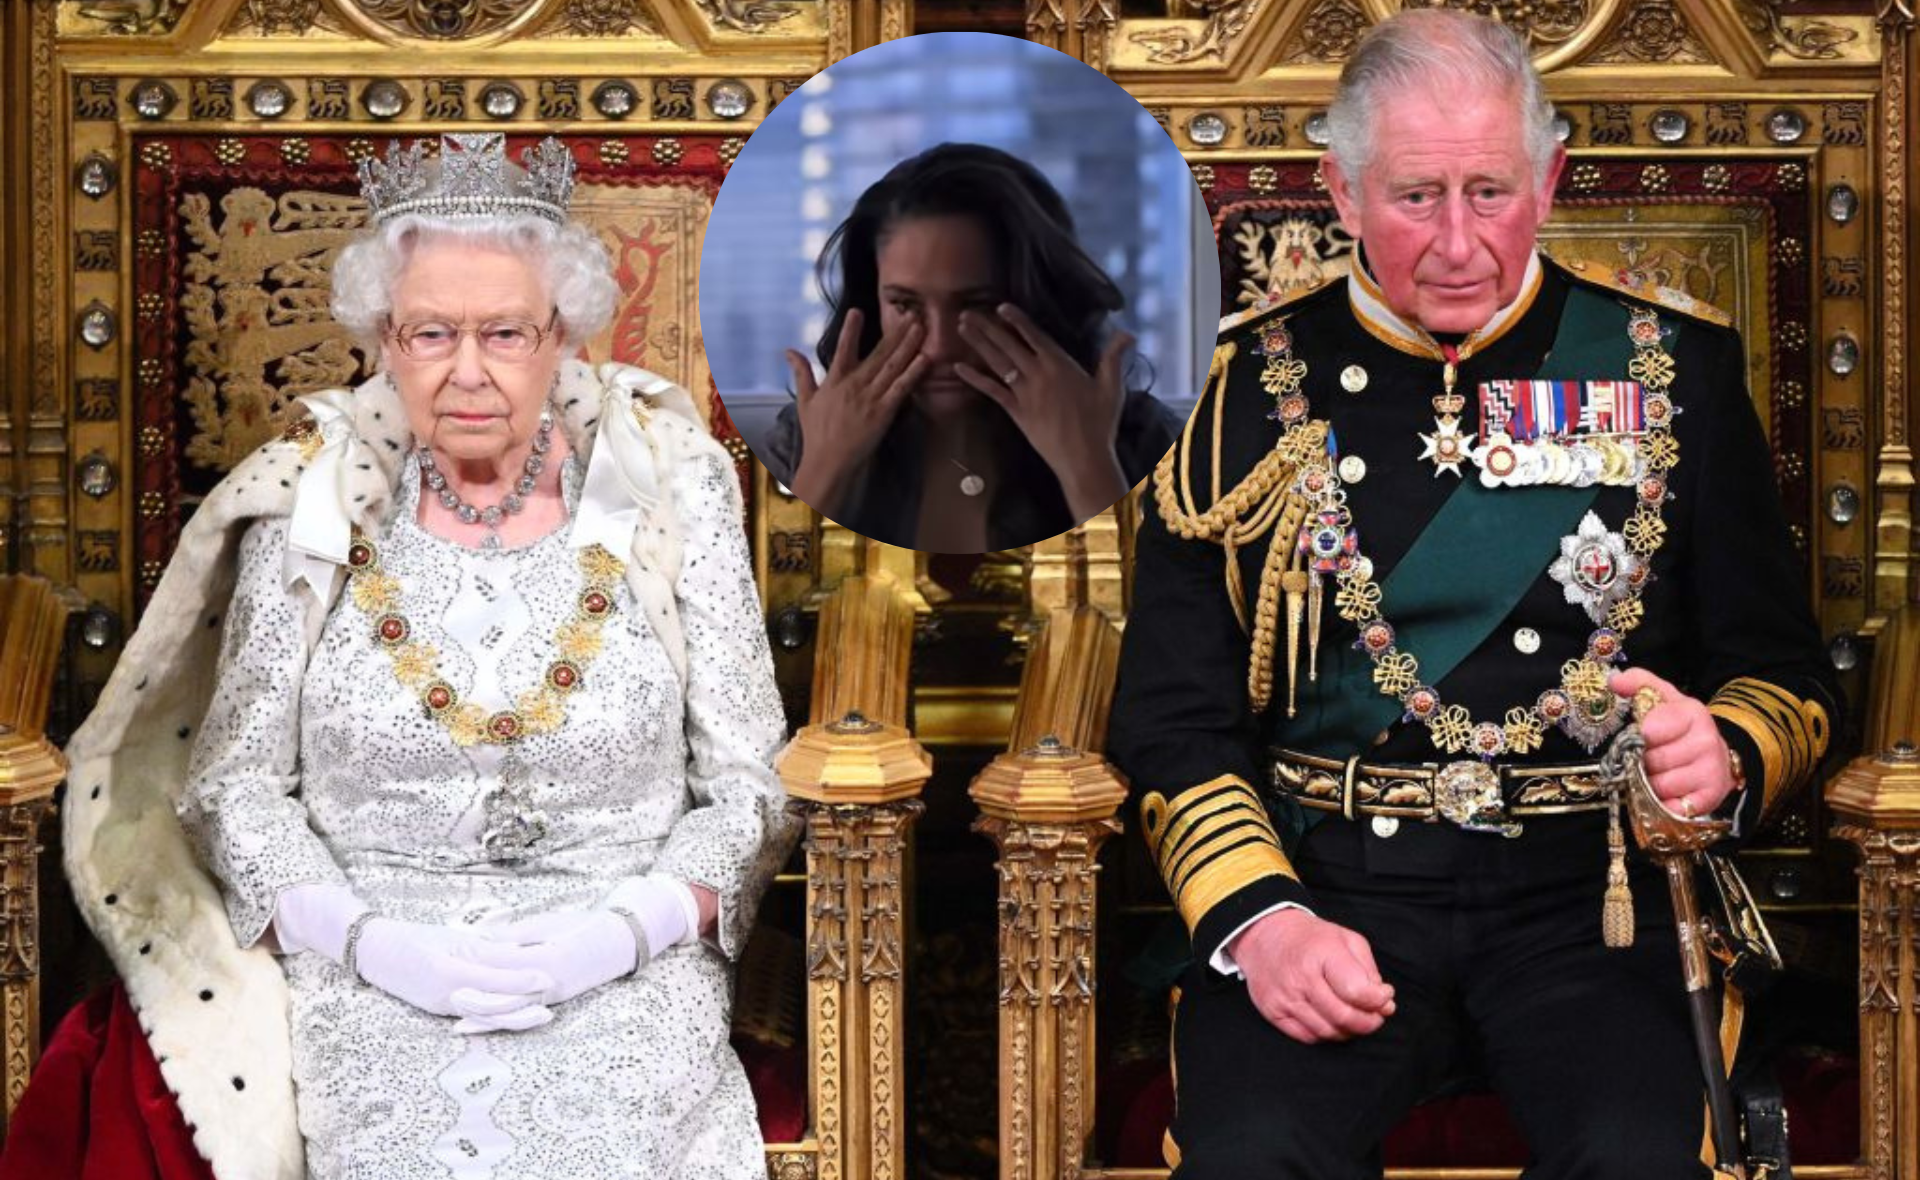 Harry slams racism in the royal family: ”My family were the problem”